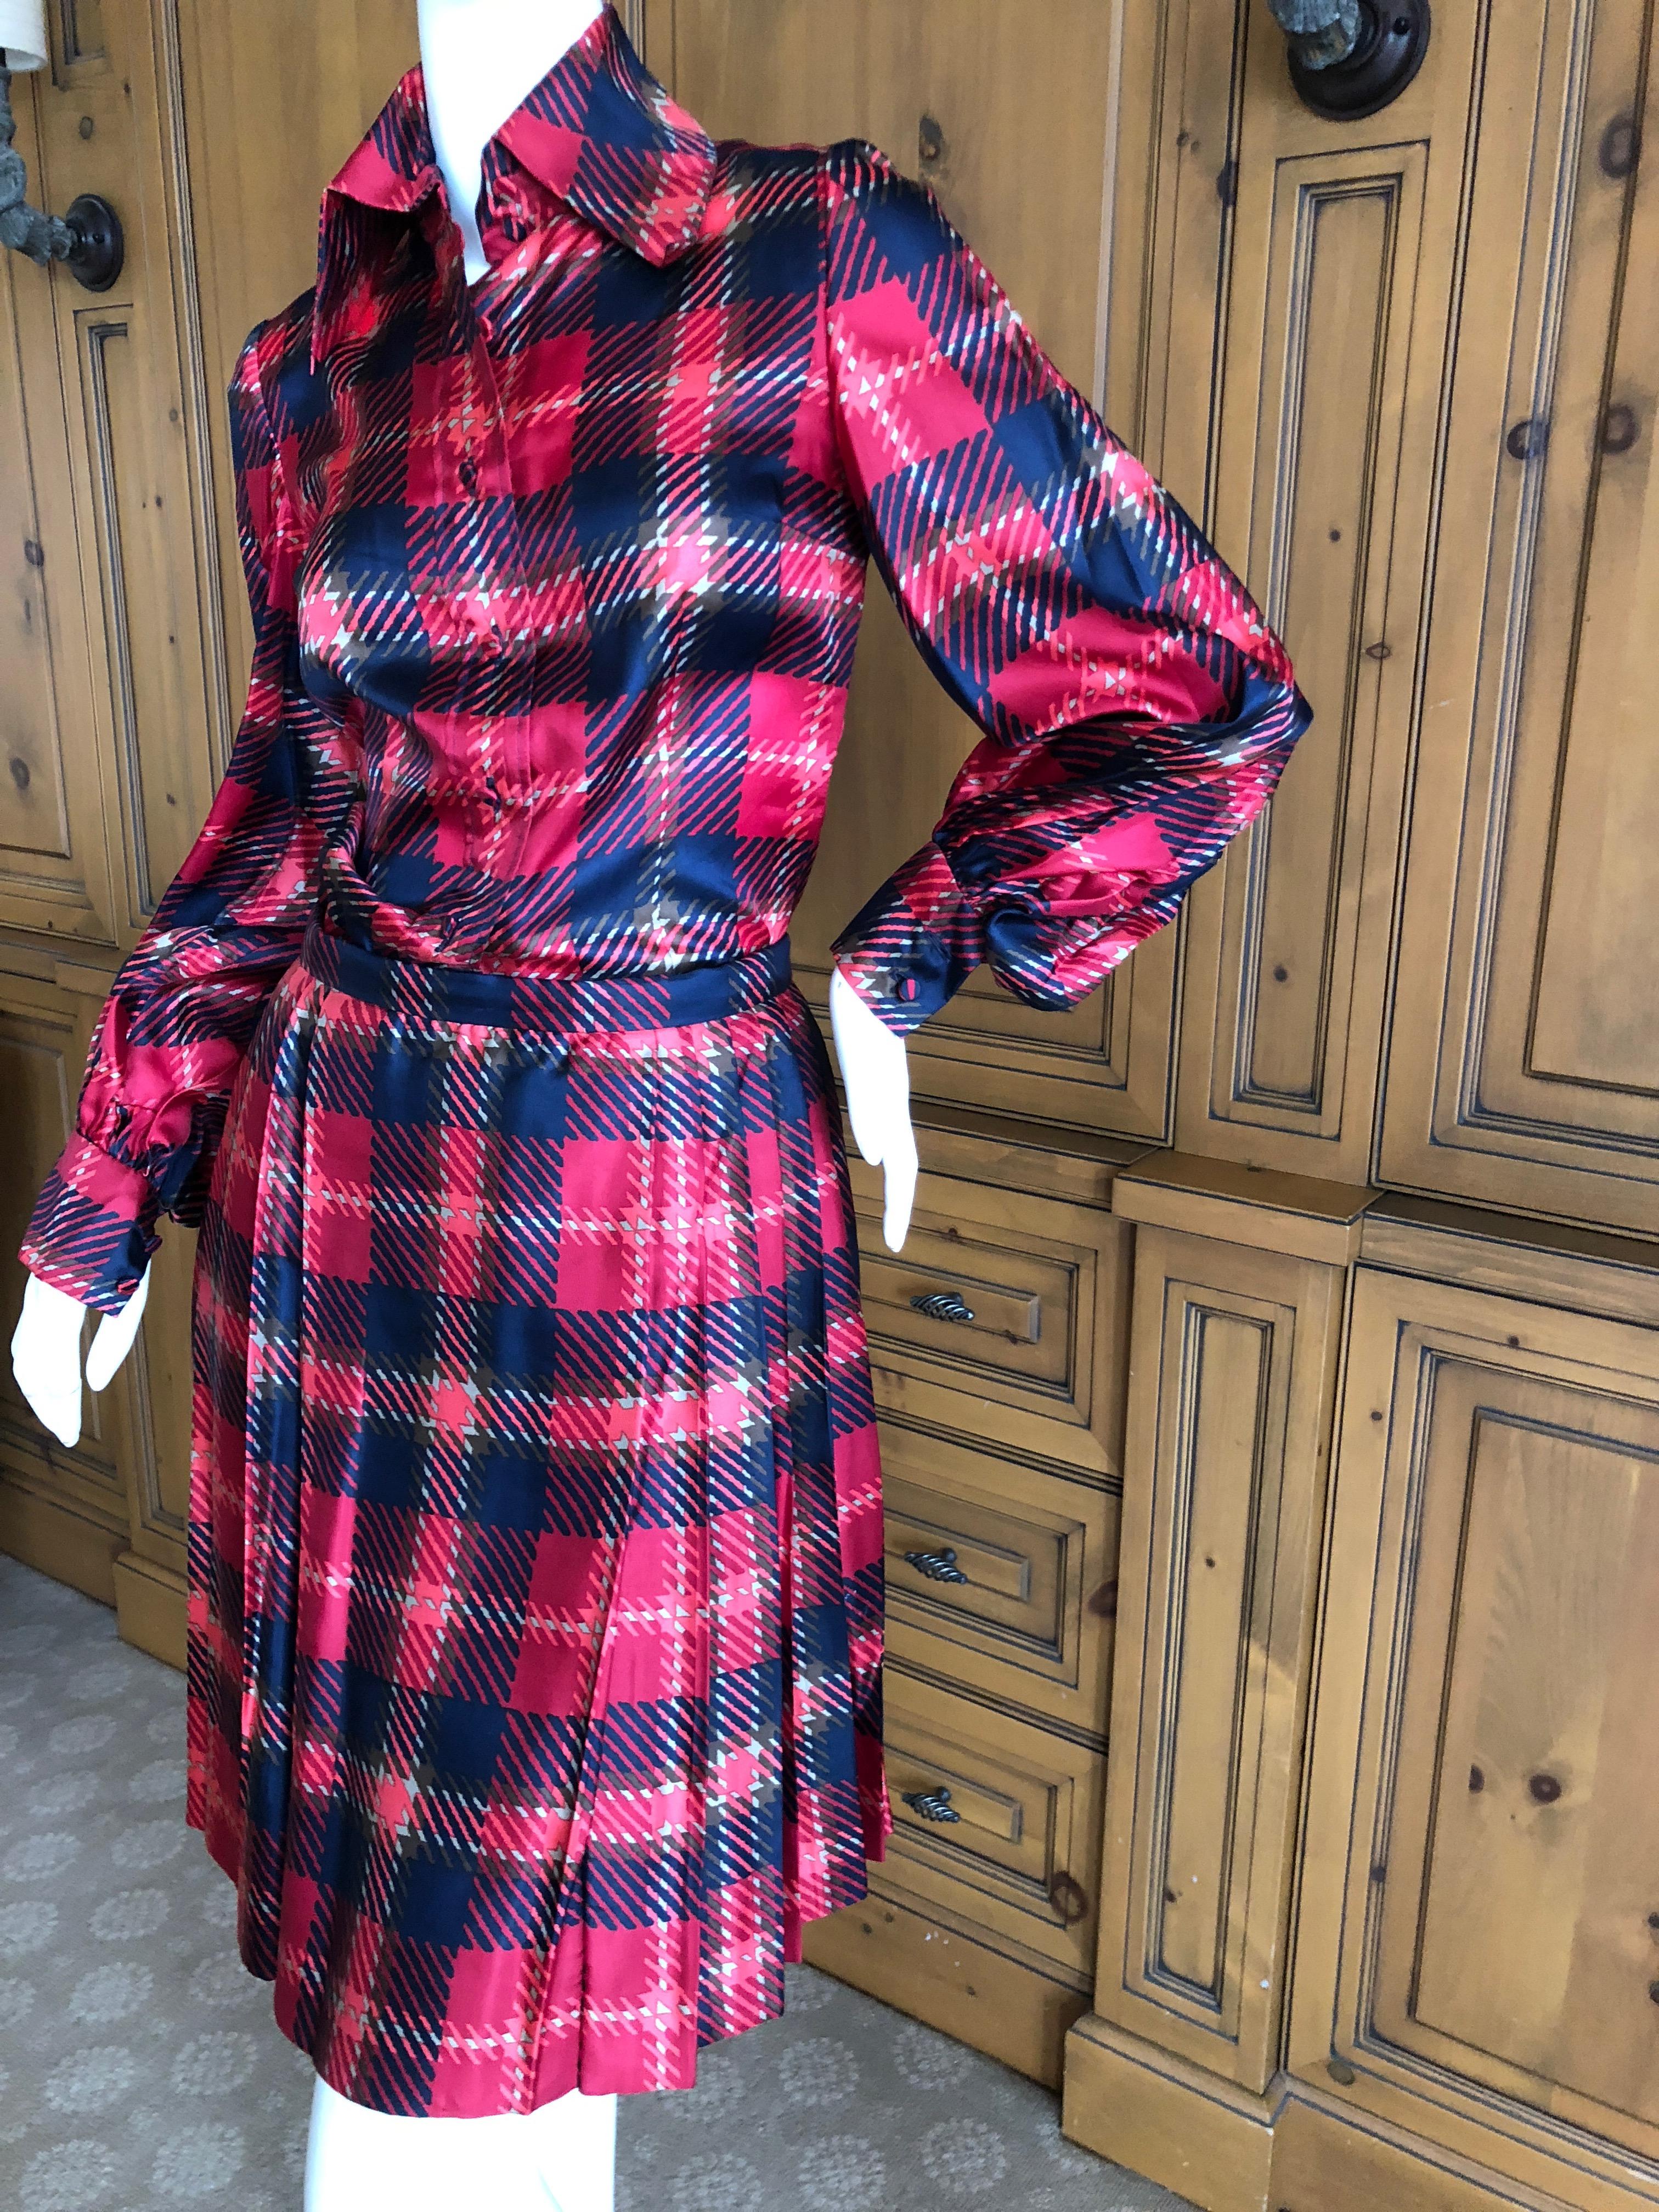 Cardinali Plaid Silk Three Piece Skirt Suit with Jacket Fall 1972 In Good Condition For Sale In Cloverdale, CA